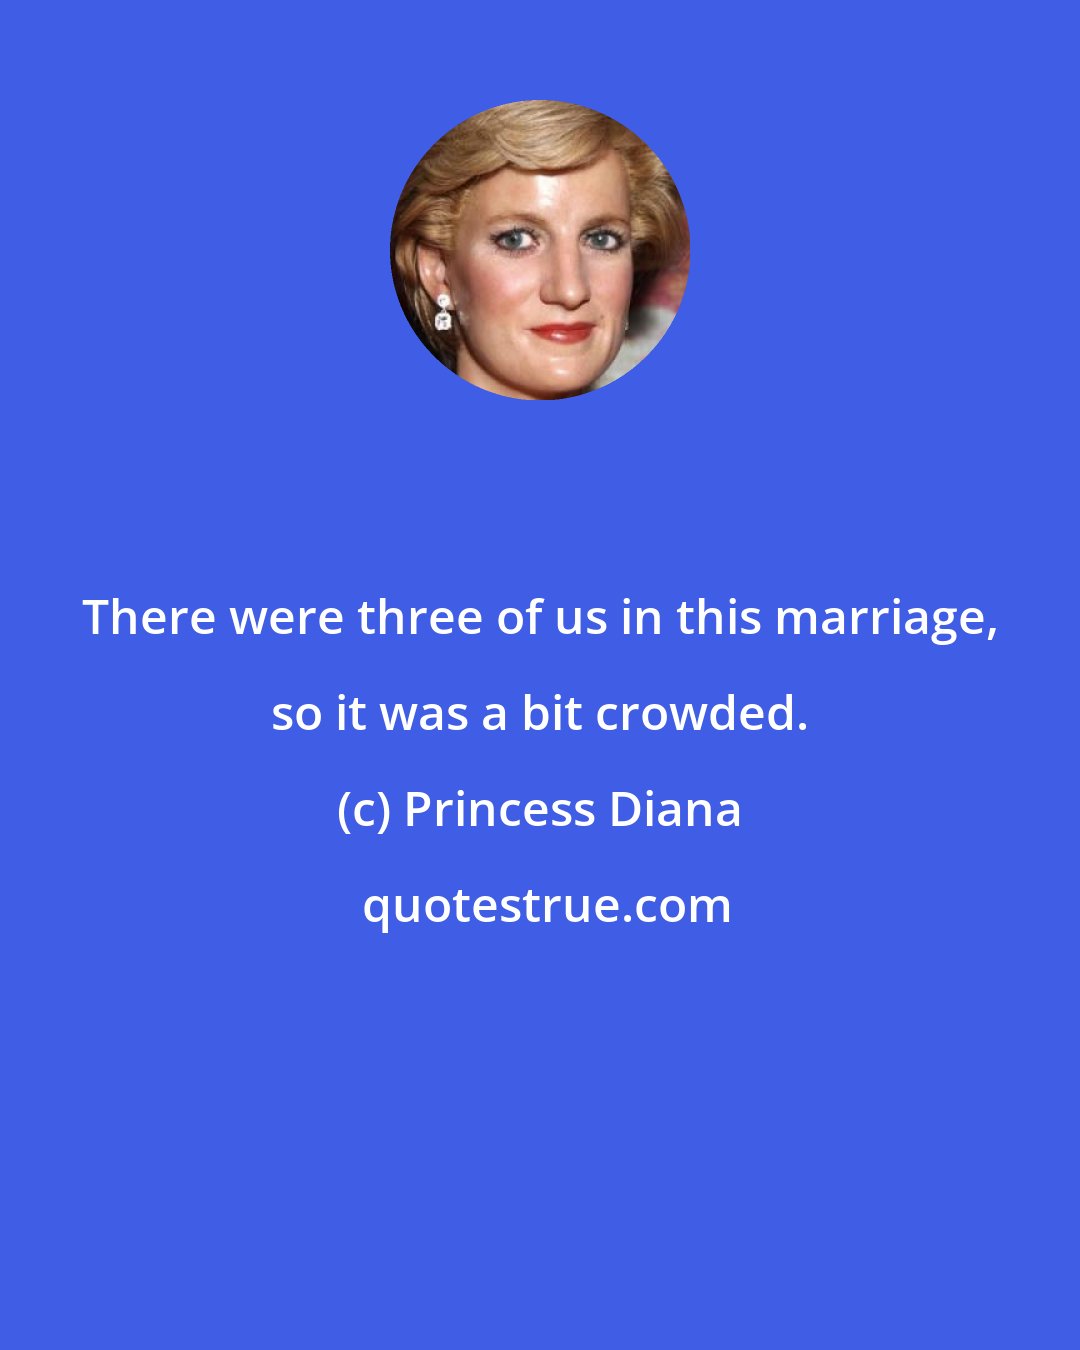 Princess Diana: There were three of us in this marriage, so it was a bit crowded.